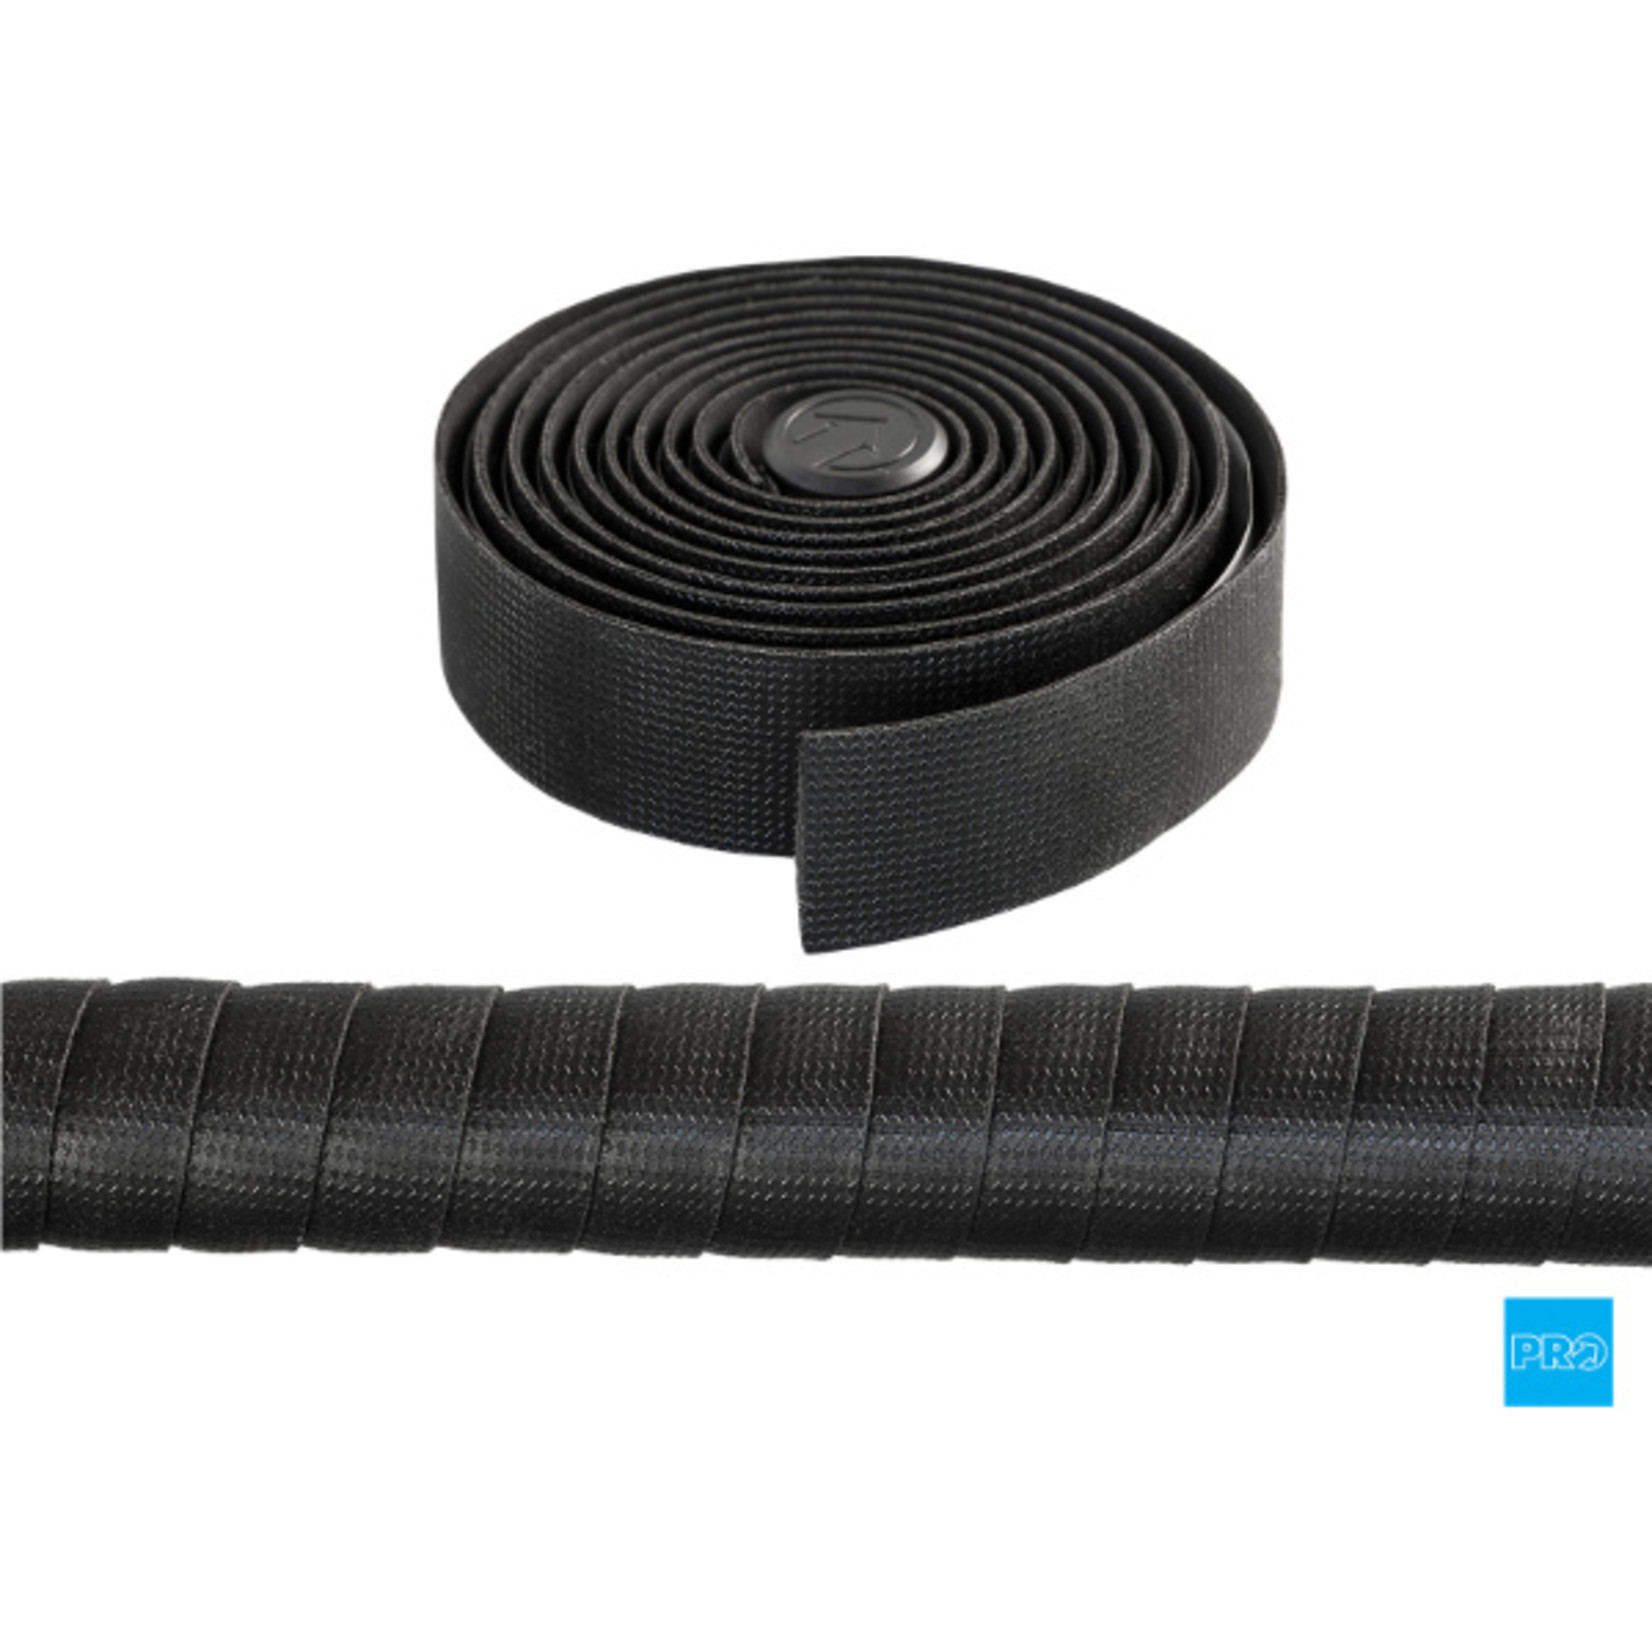 Pro Components Pro, Bar Tape Race Comfort Silicone Black